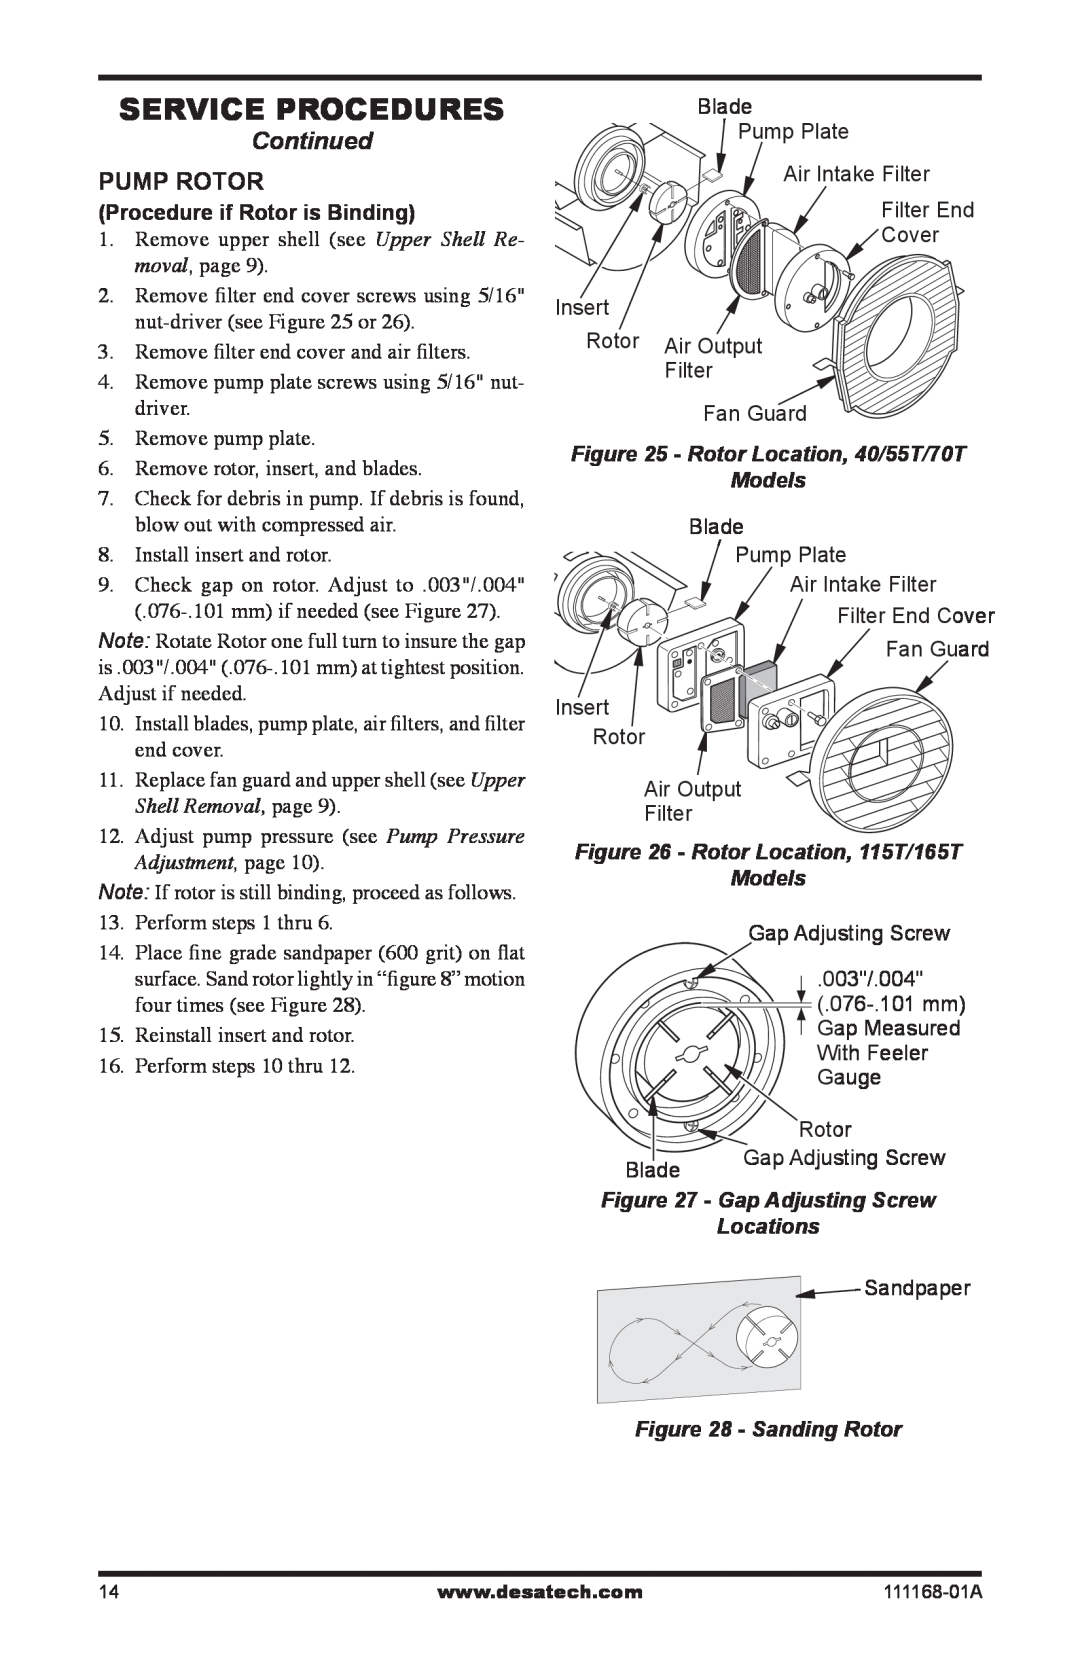 Desa RC55T Service Procedures, Continued, Pump Rotor, Procedure if Rotor is Binding, Rotor Location, 40/55T/70T Models 